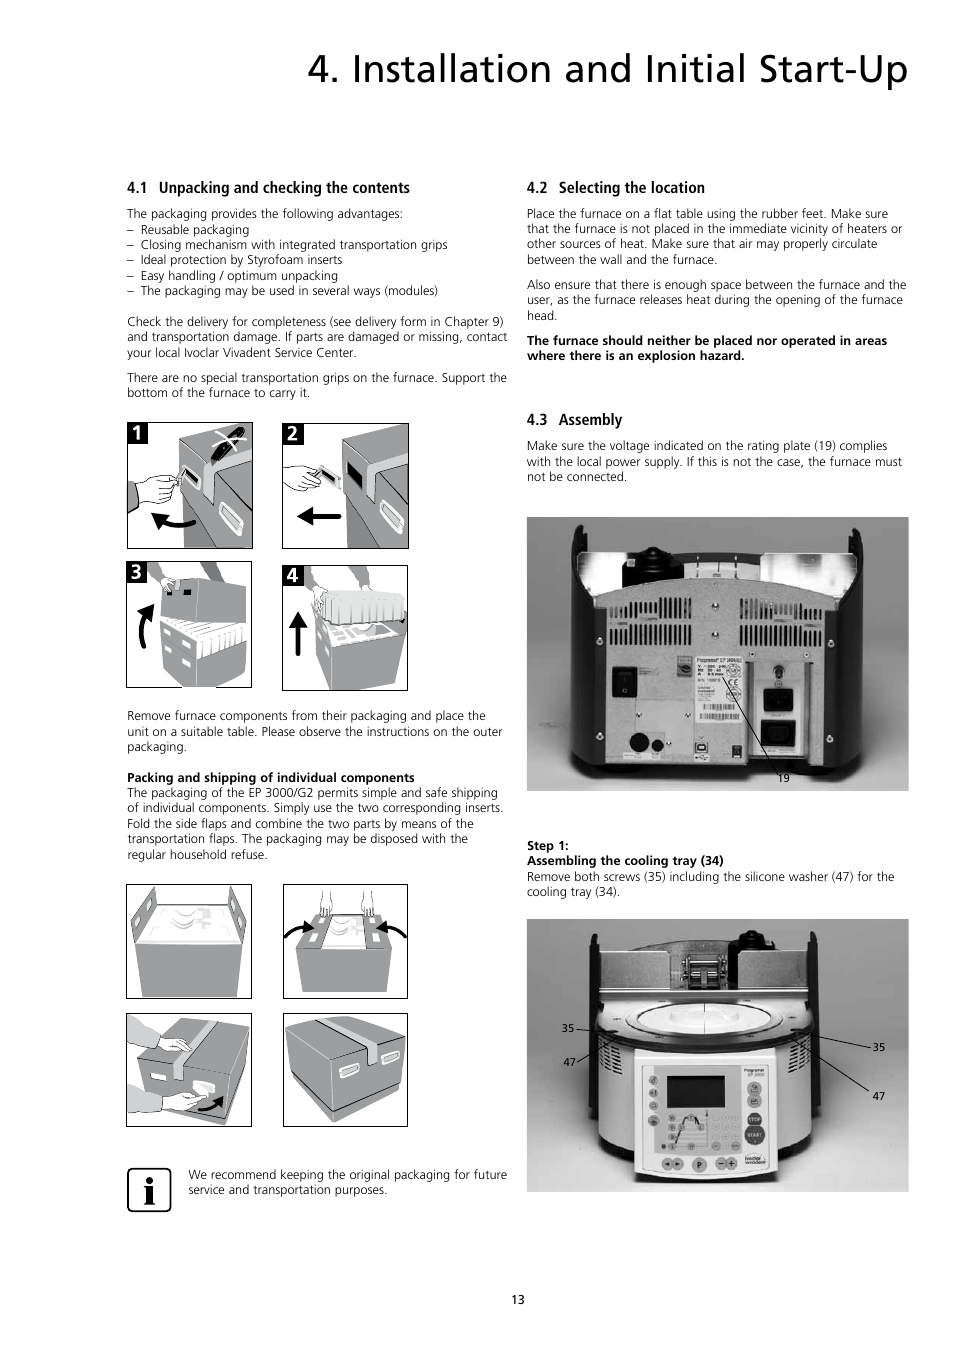 Installation And Initial Start Up Product Description Ivoclar Vivadent Ep3000 G2 User Manual Page 13 40